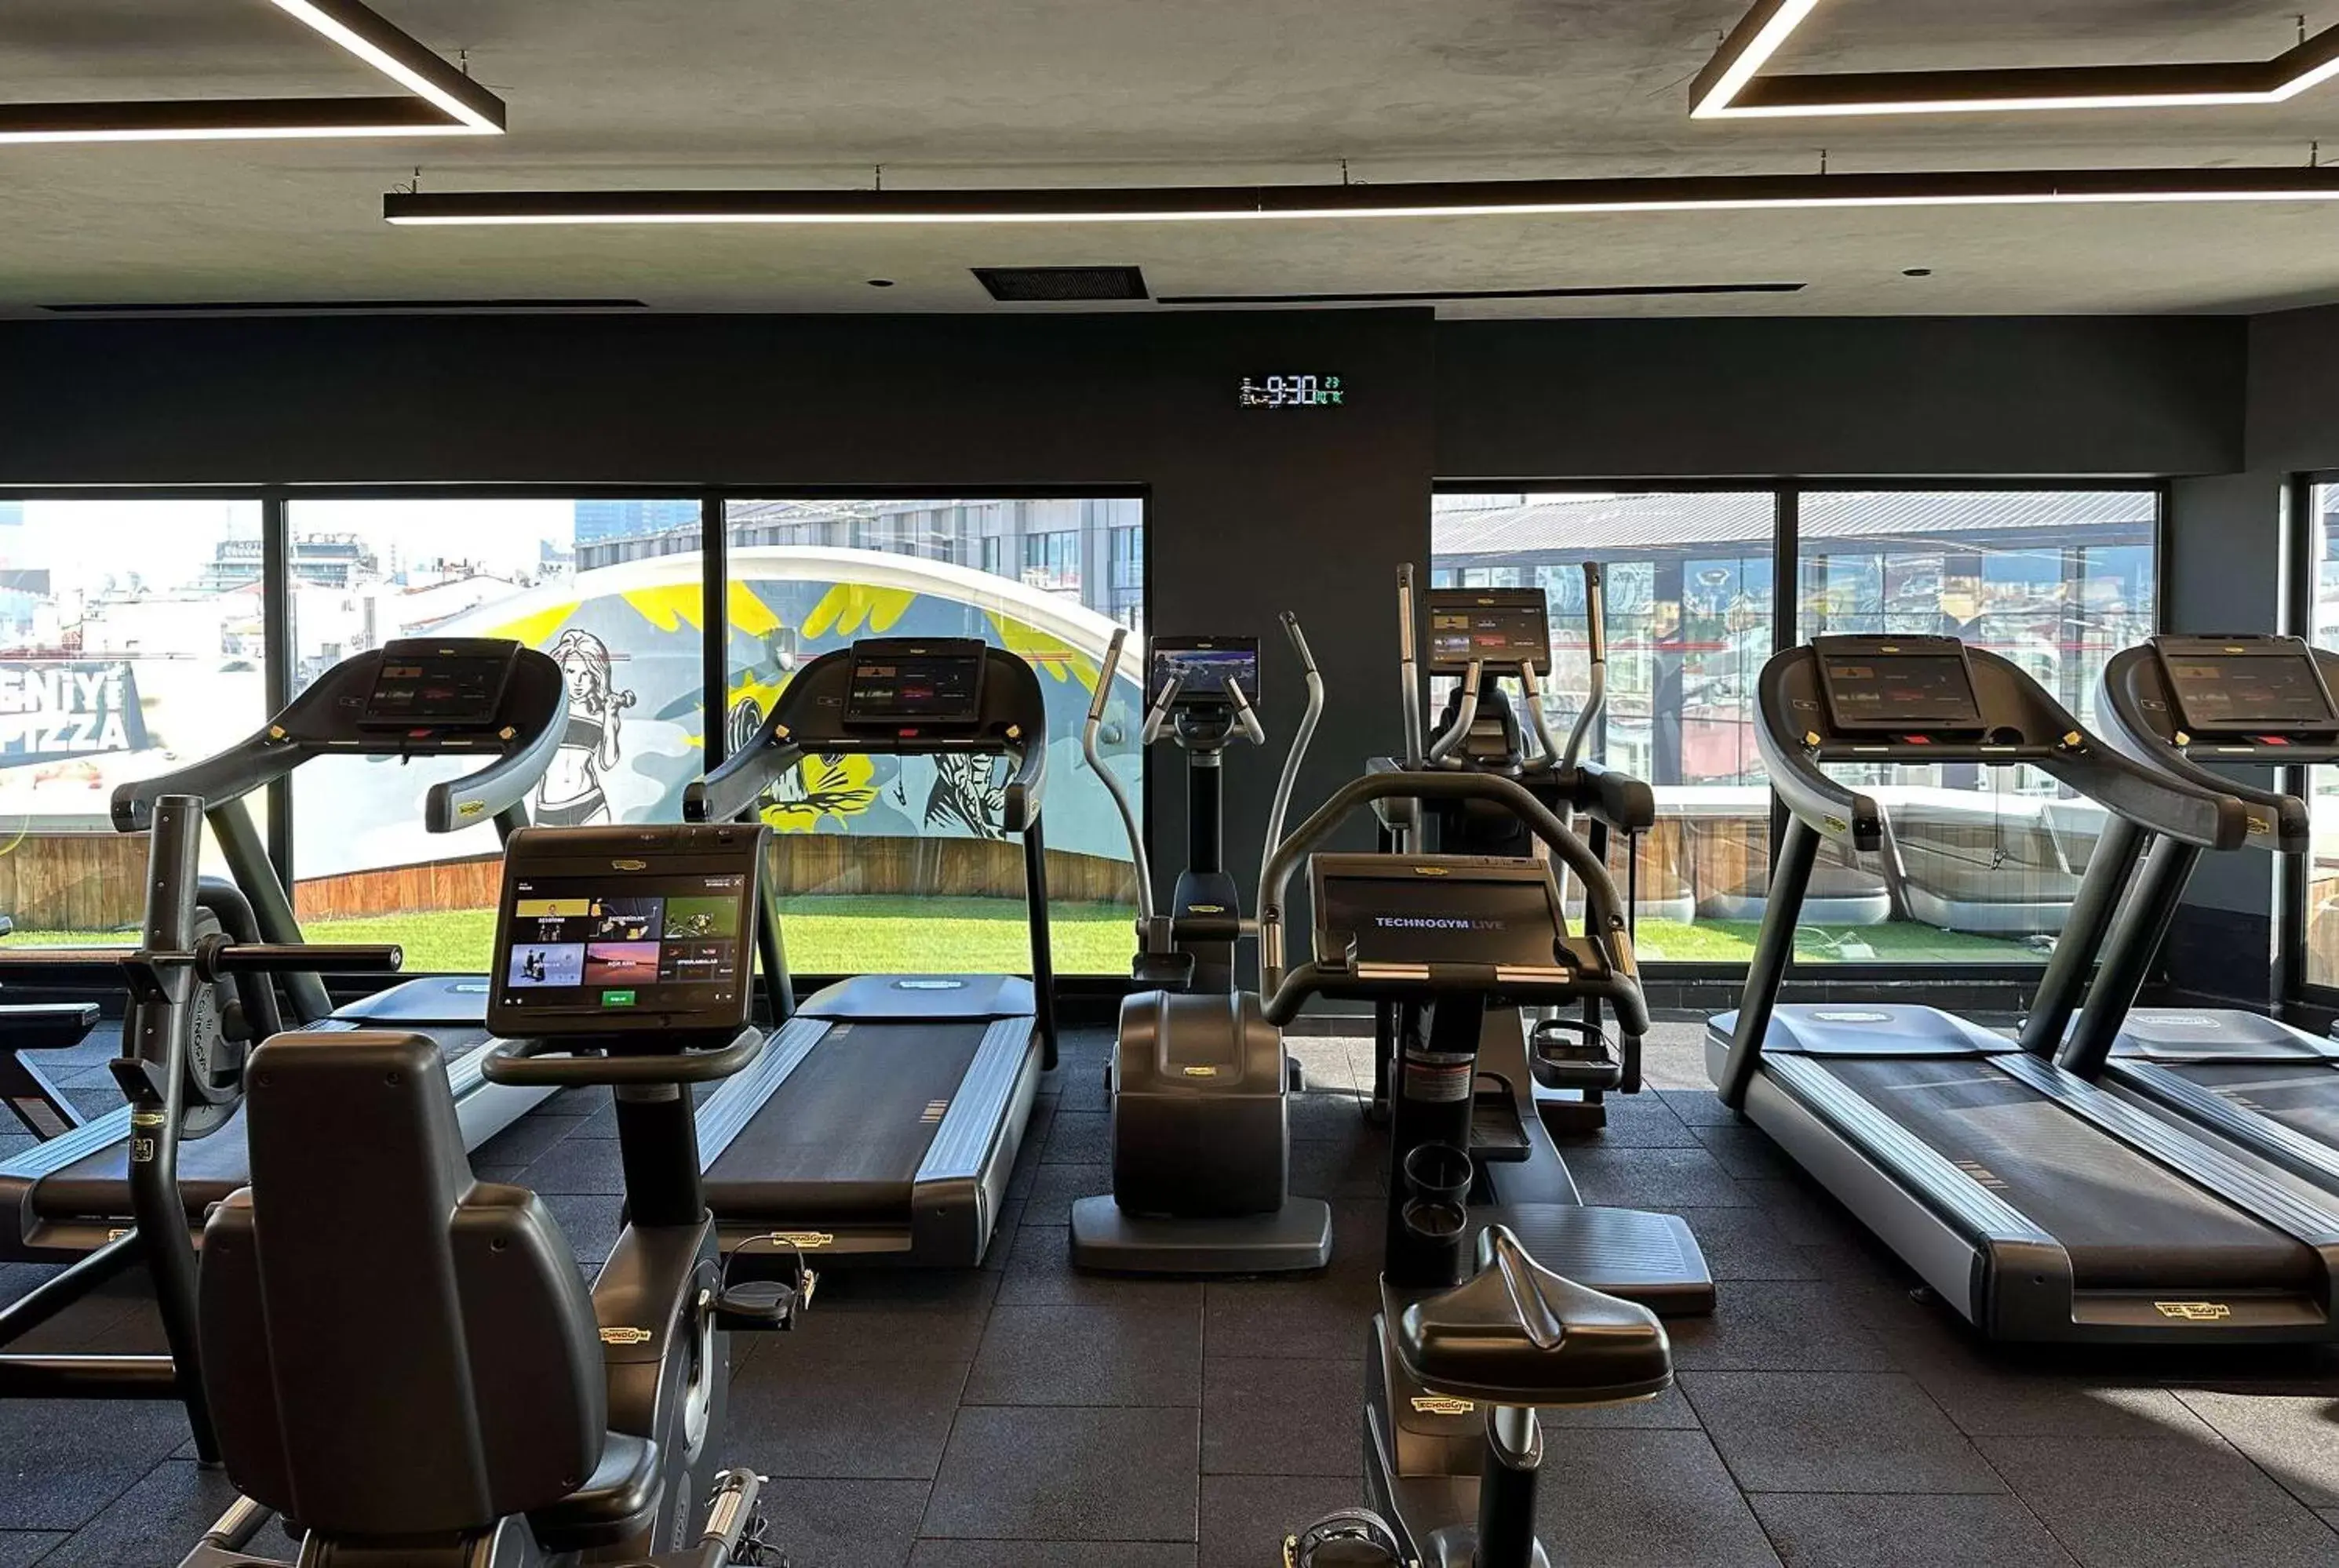 Fitness centre/facilities, Fitness Center/Facilities in Ramada Plaza By Wyndham Istanbul City Center